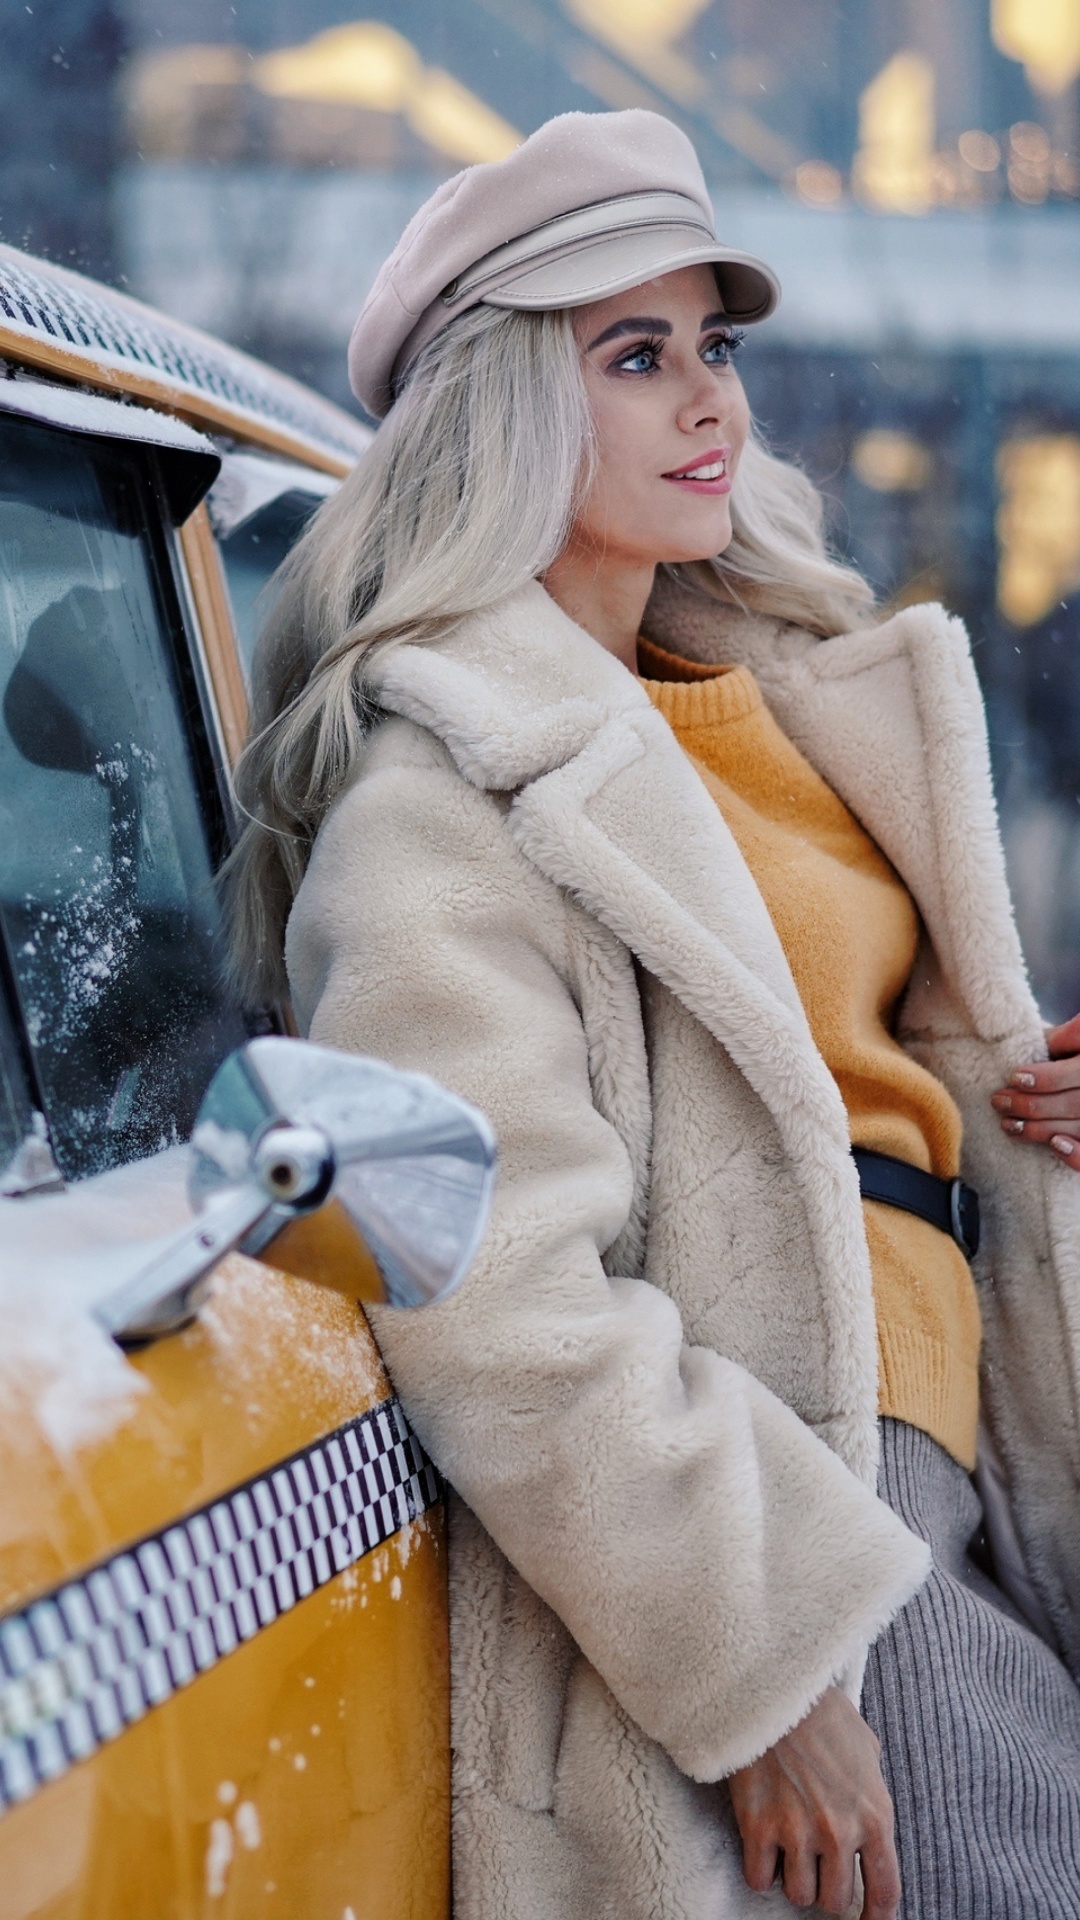 Winter Girl and Taxi wallpaper 1080x1920